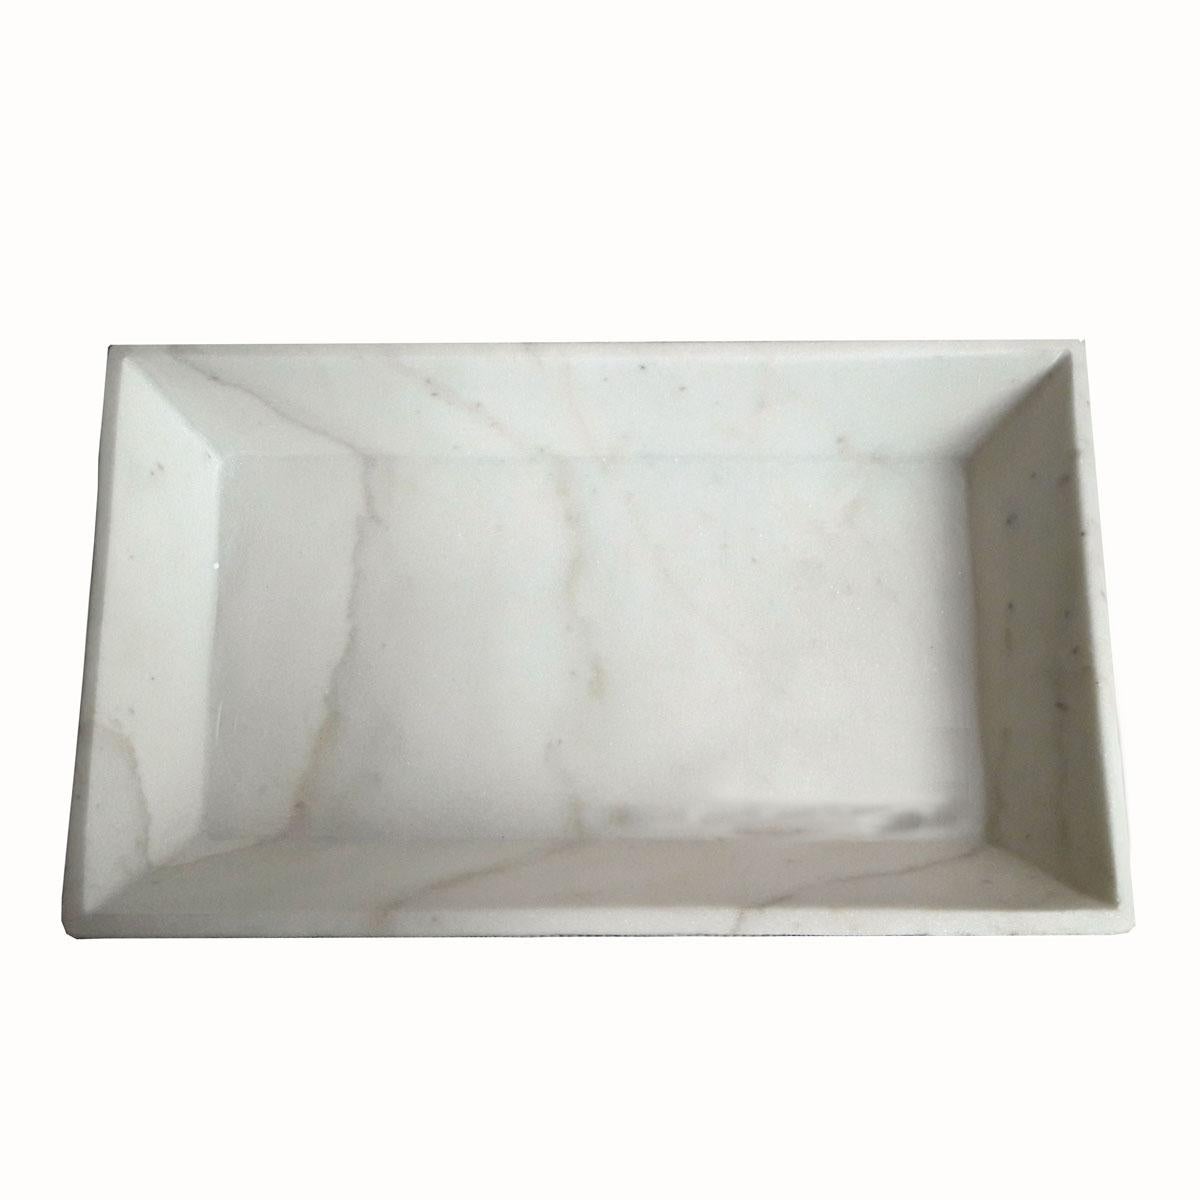 A white marble tray from India with beveled sides. Sleek and elegant, this small tray is ideal as an accessories tray for a bedroom vanity, a bathroom hand towel tray, or as a decorative element in any other room.